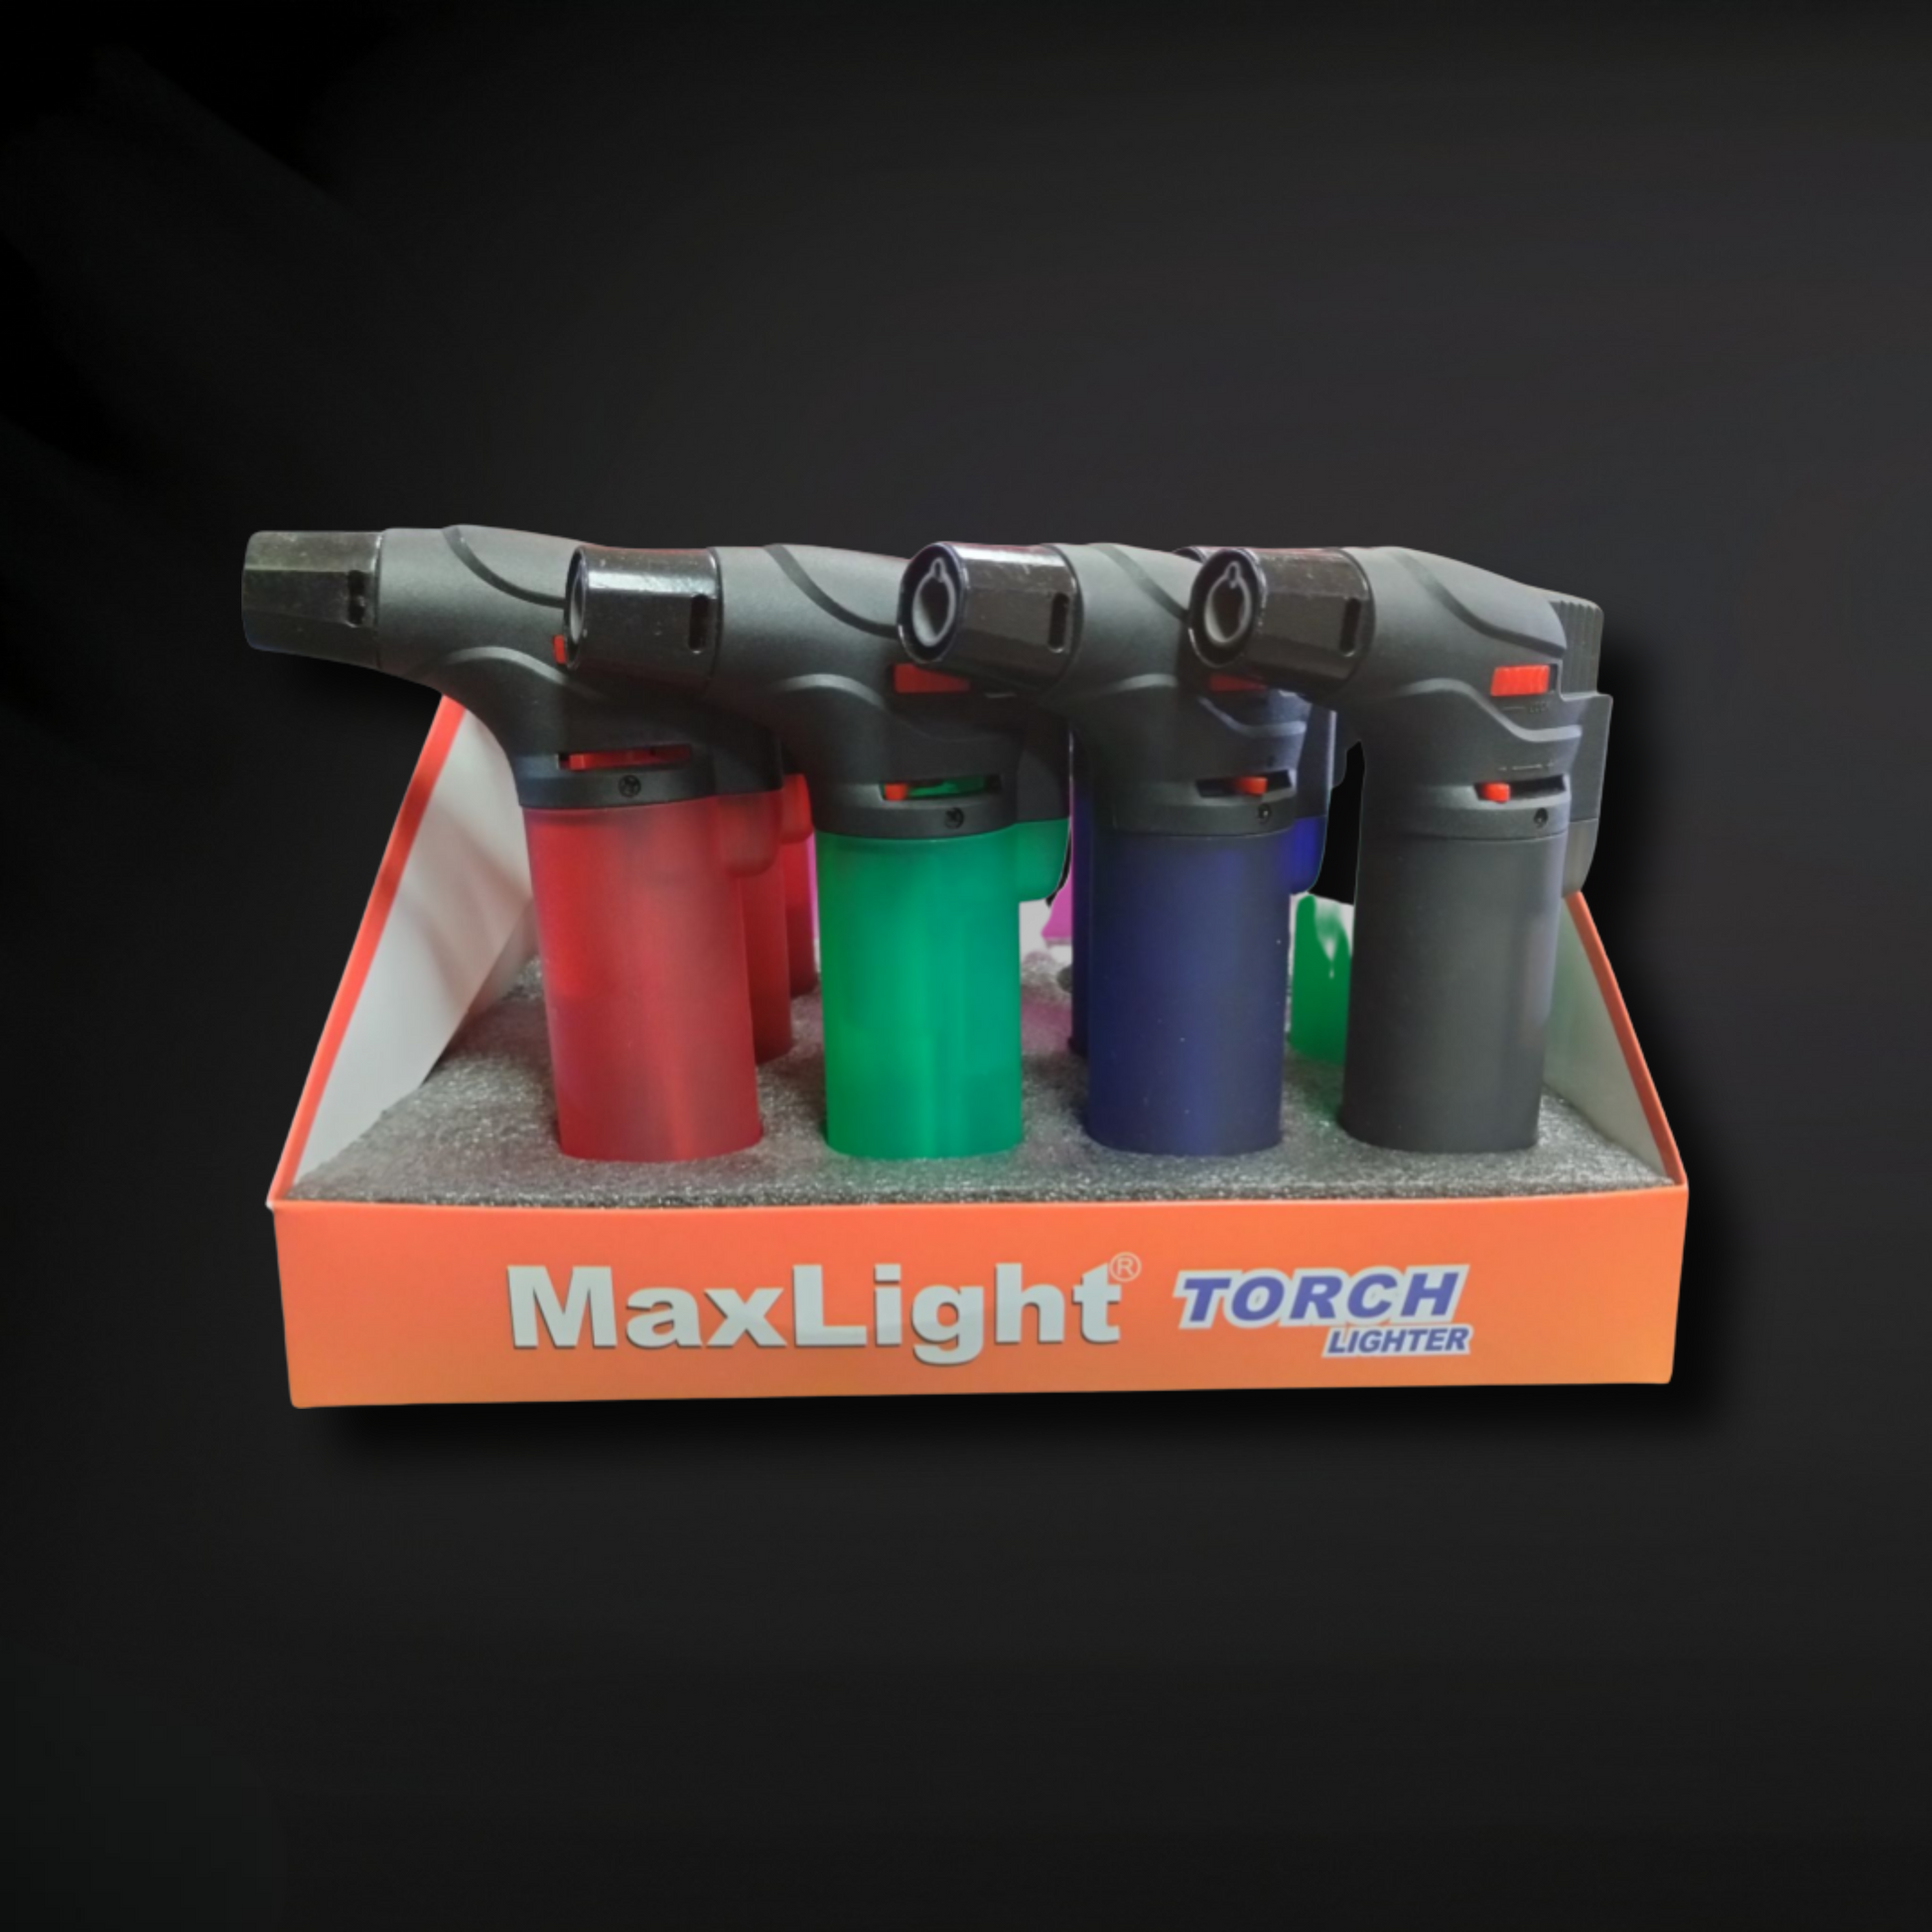 "Maxlight Torch" Lighter - Assorted Colors Zack Wholesale